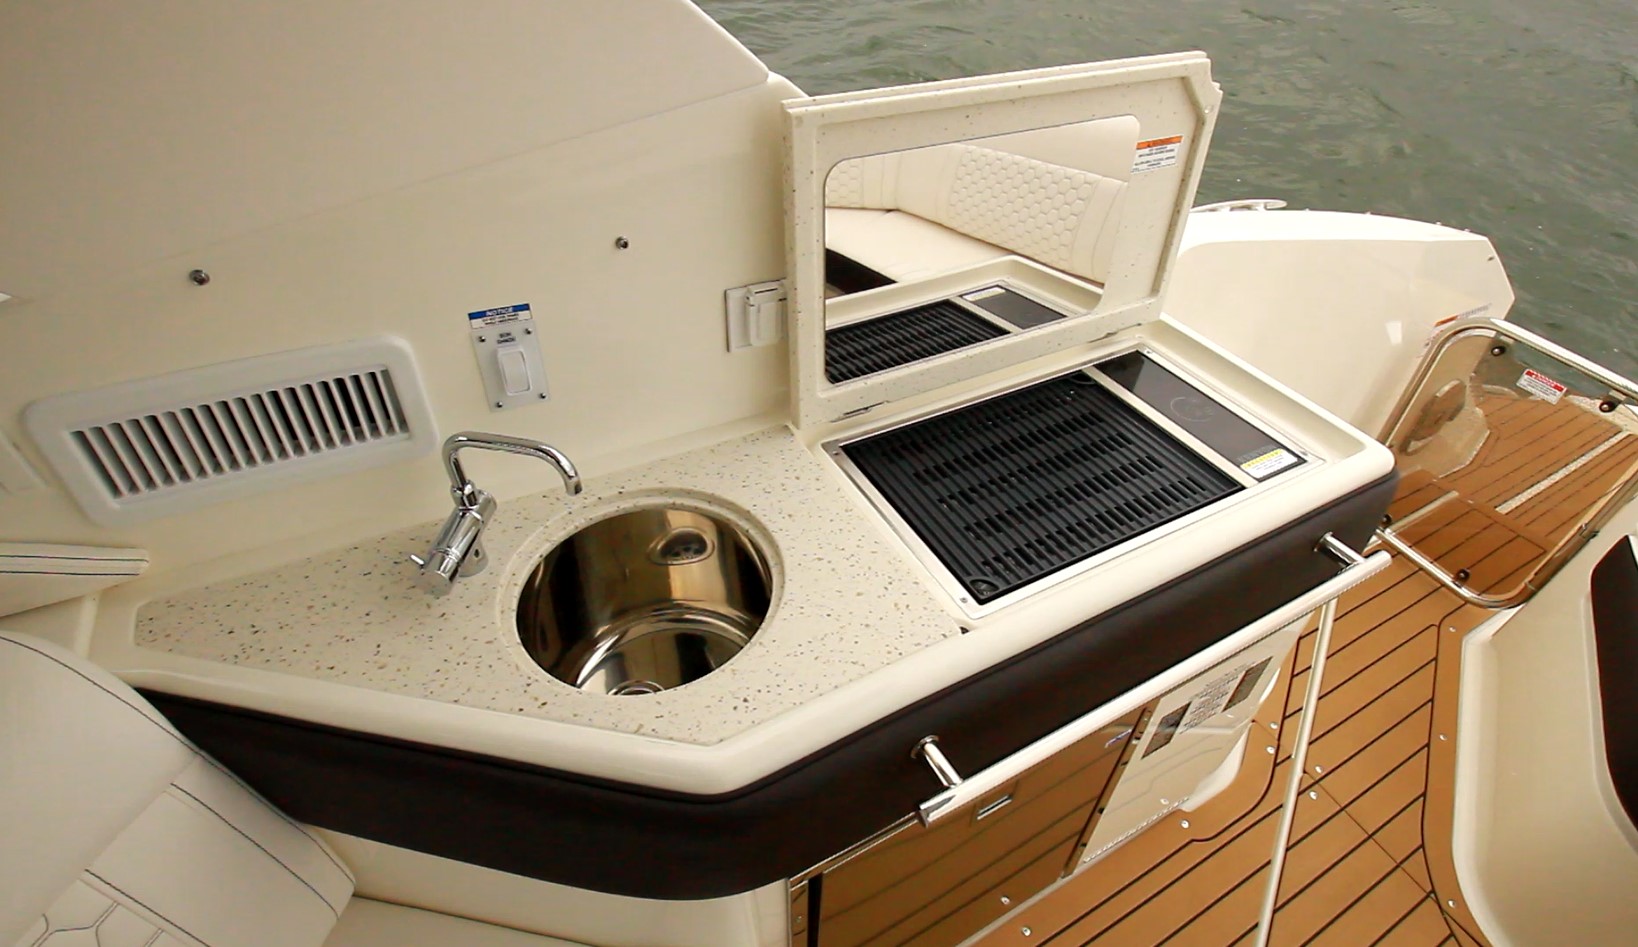 Sink and grill